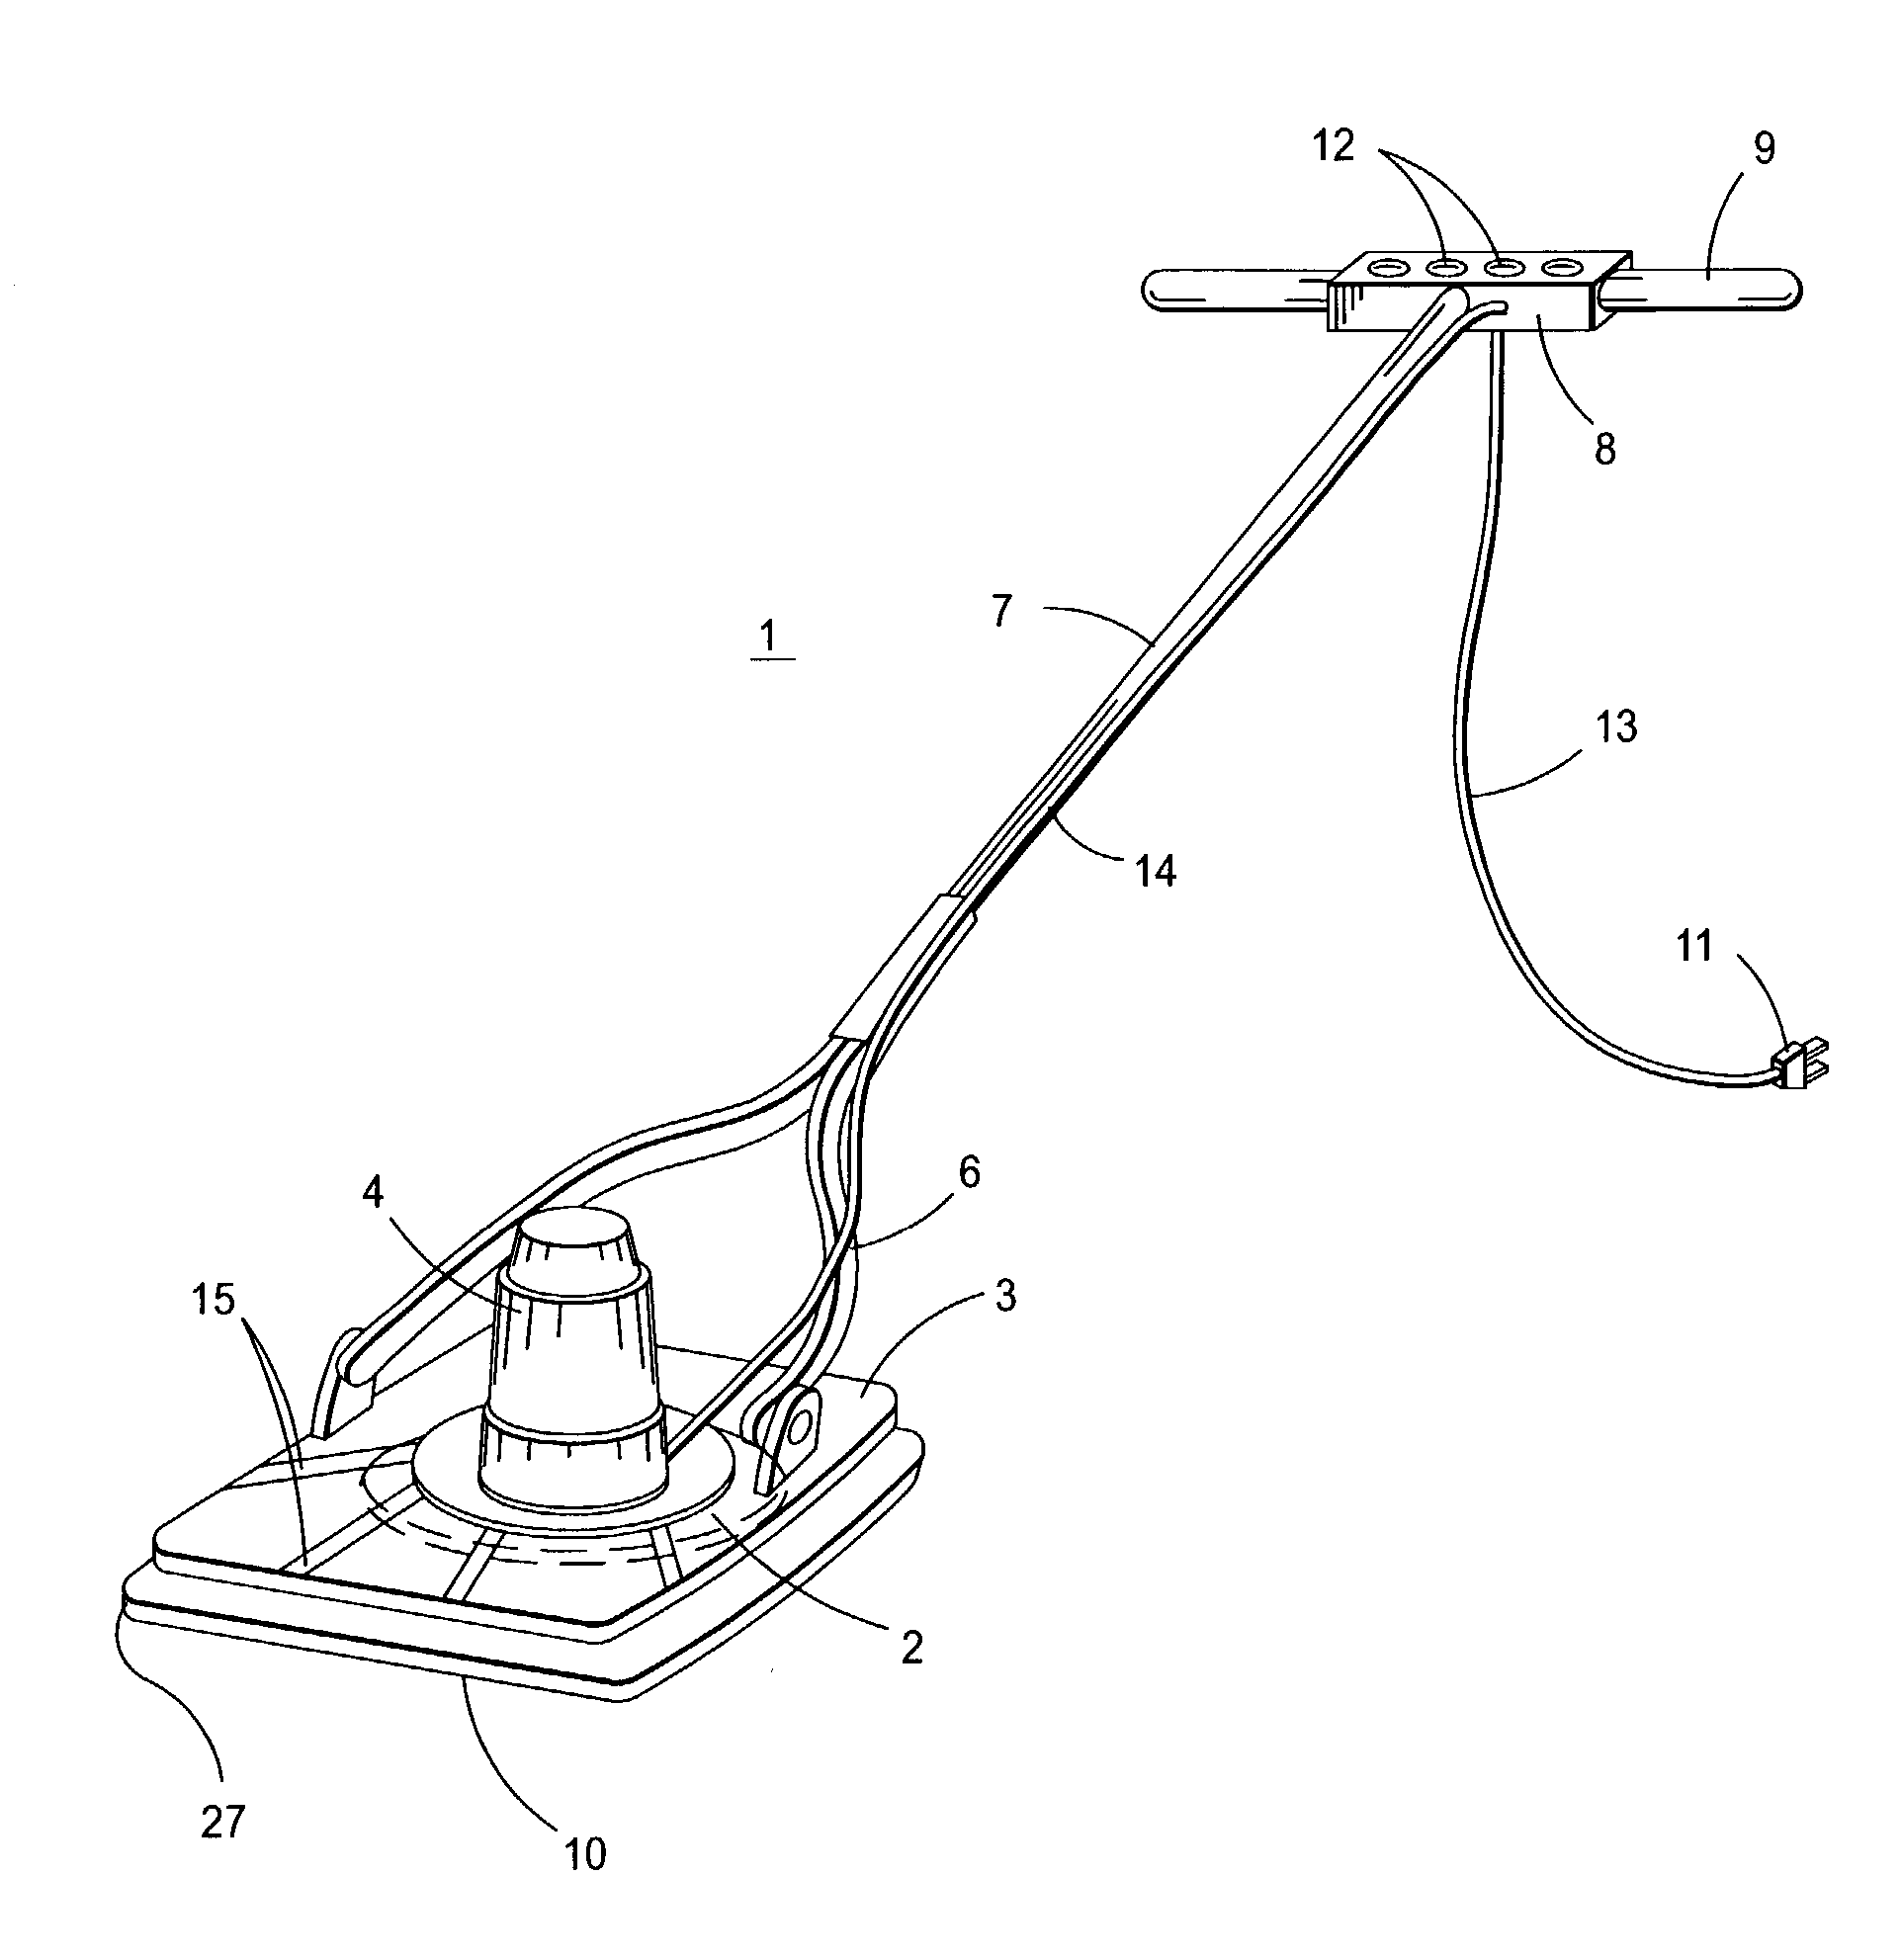 Carpet cleaning apparatus and method with vibration, heat, and cleaning agent